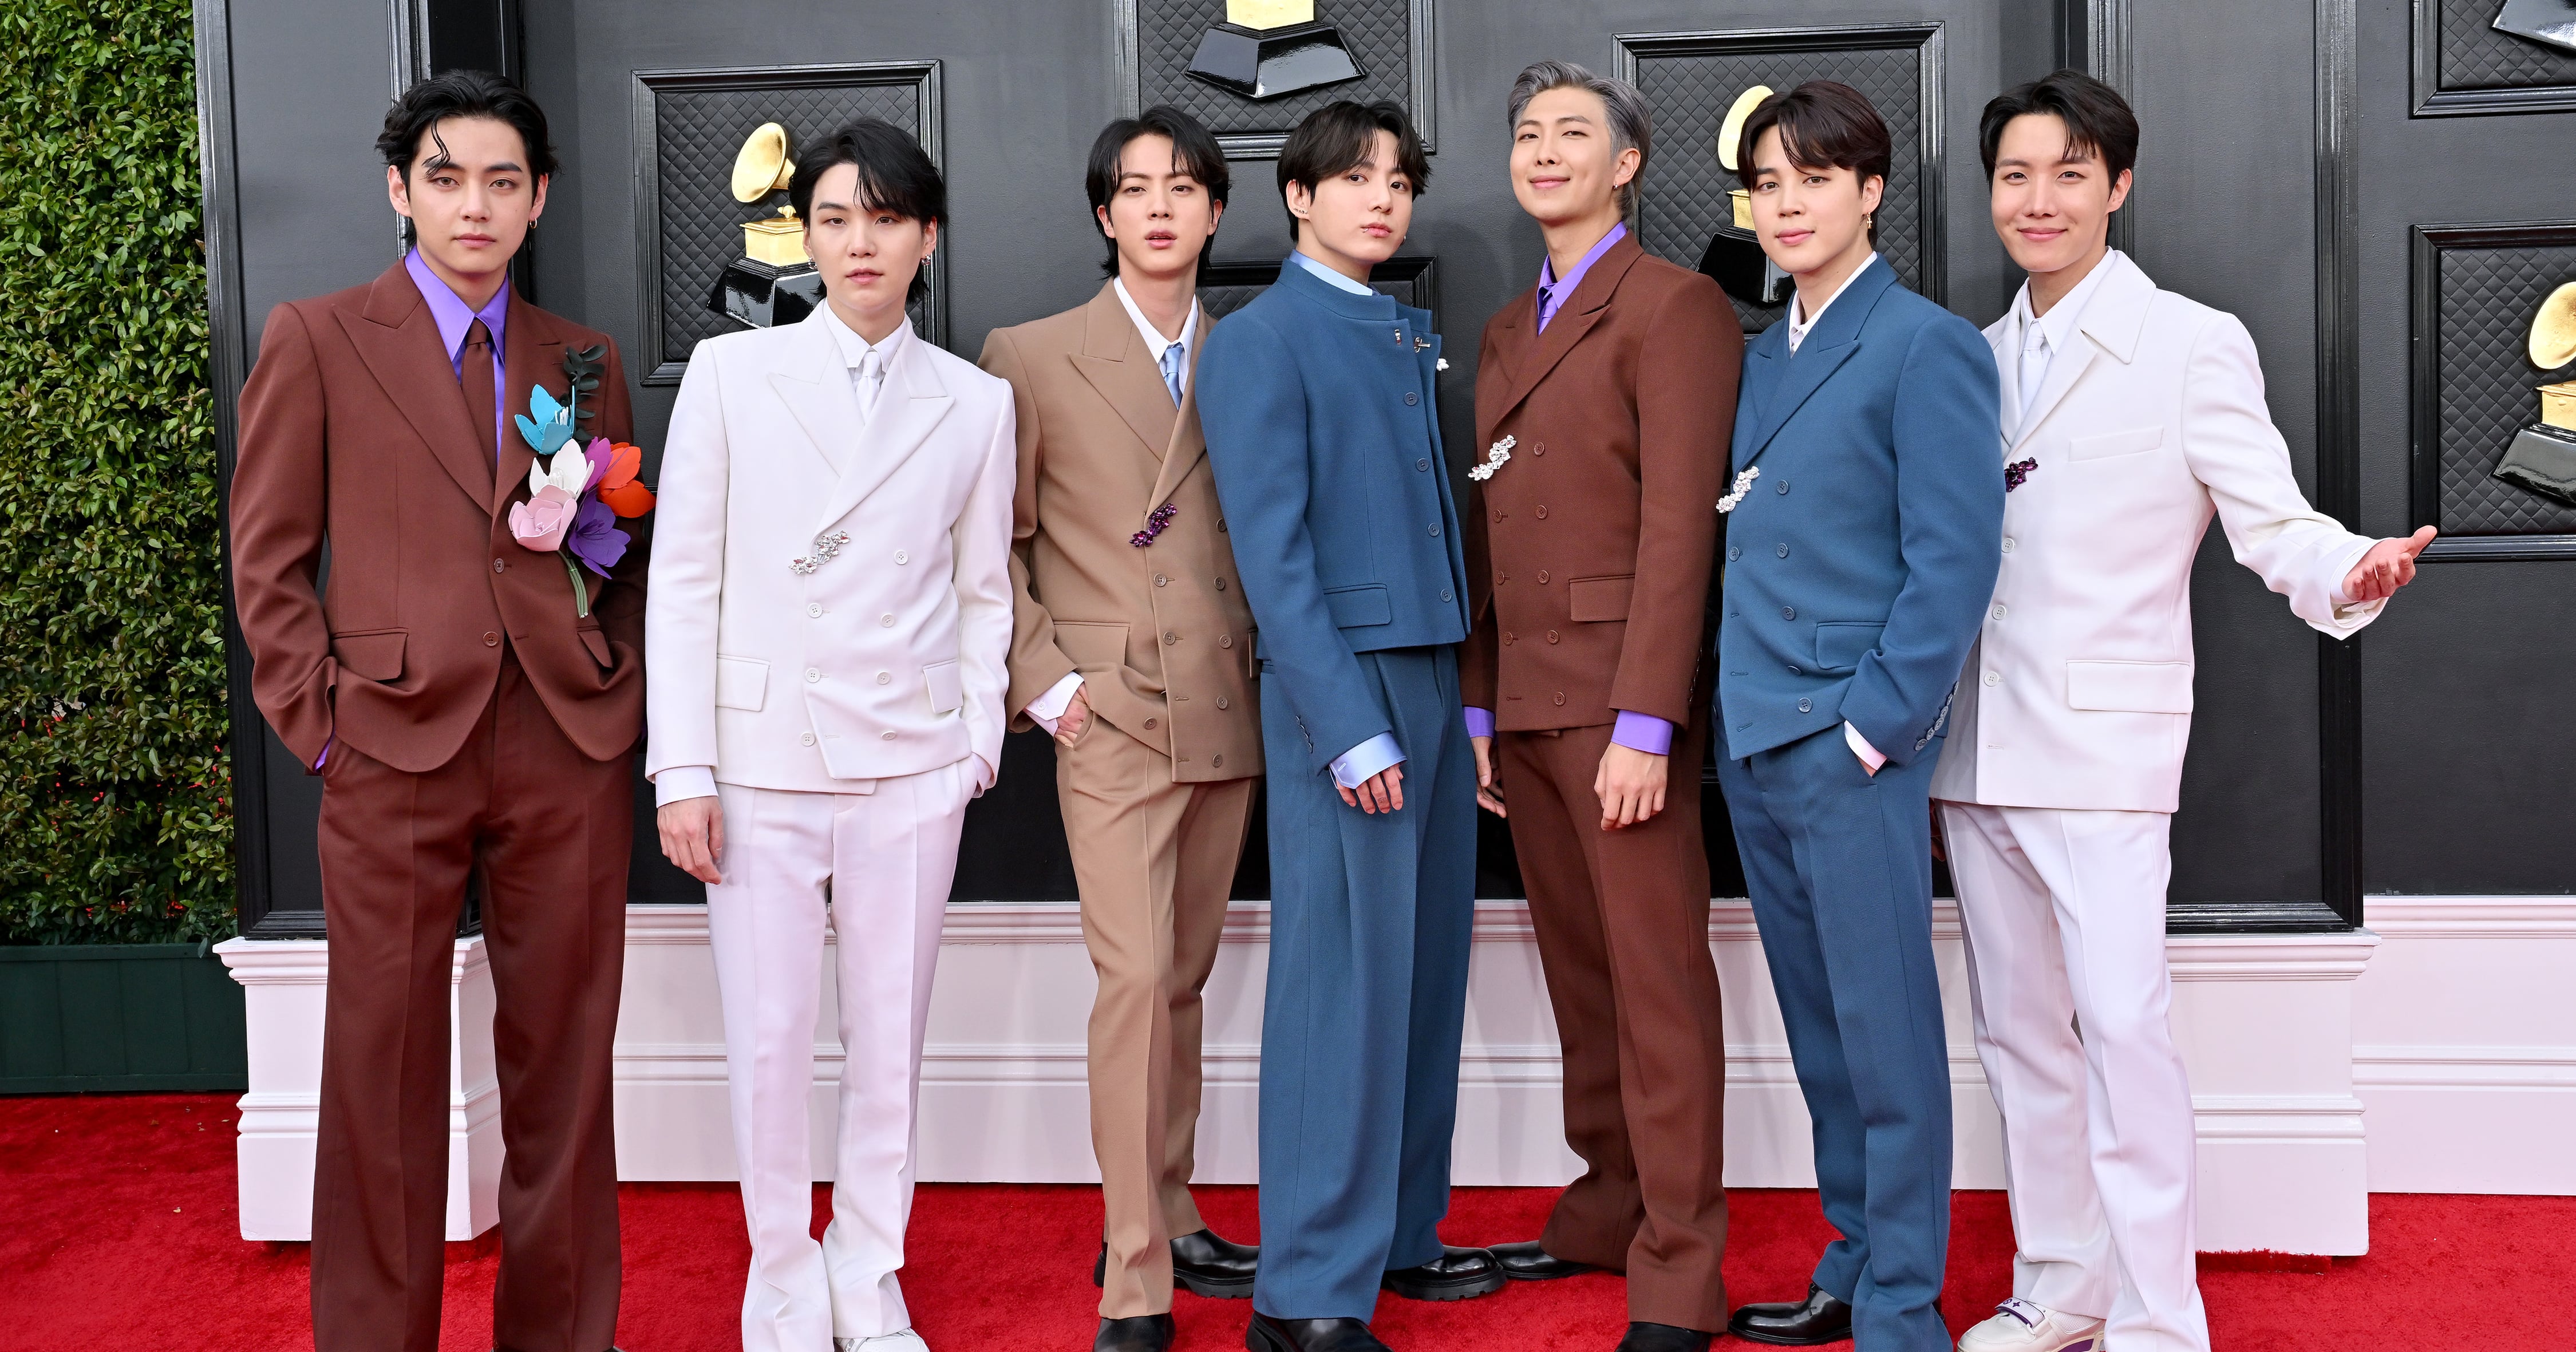 BTS will focus on solo albums, embark on new chapters